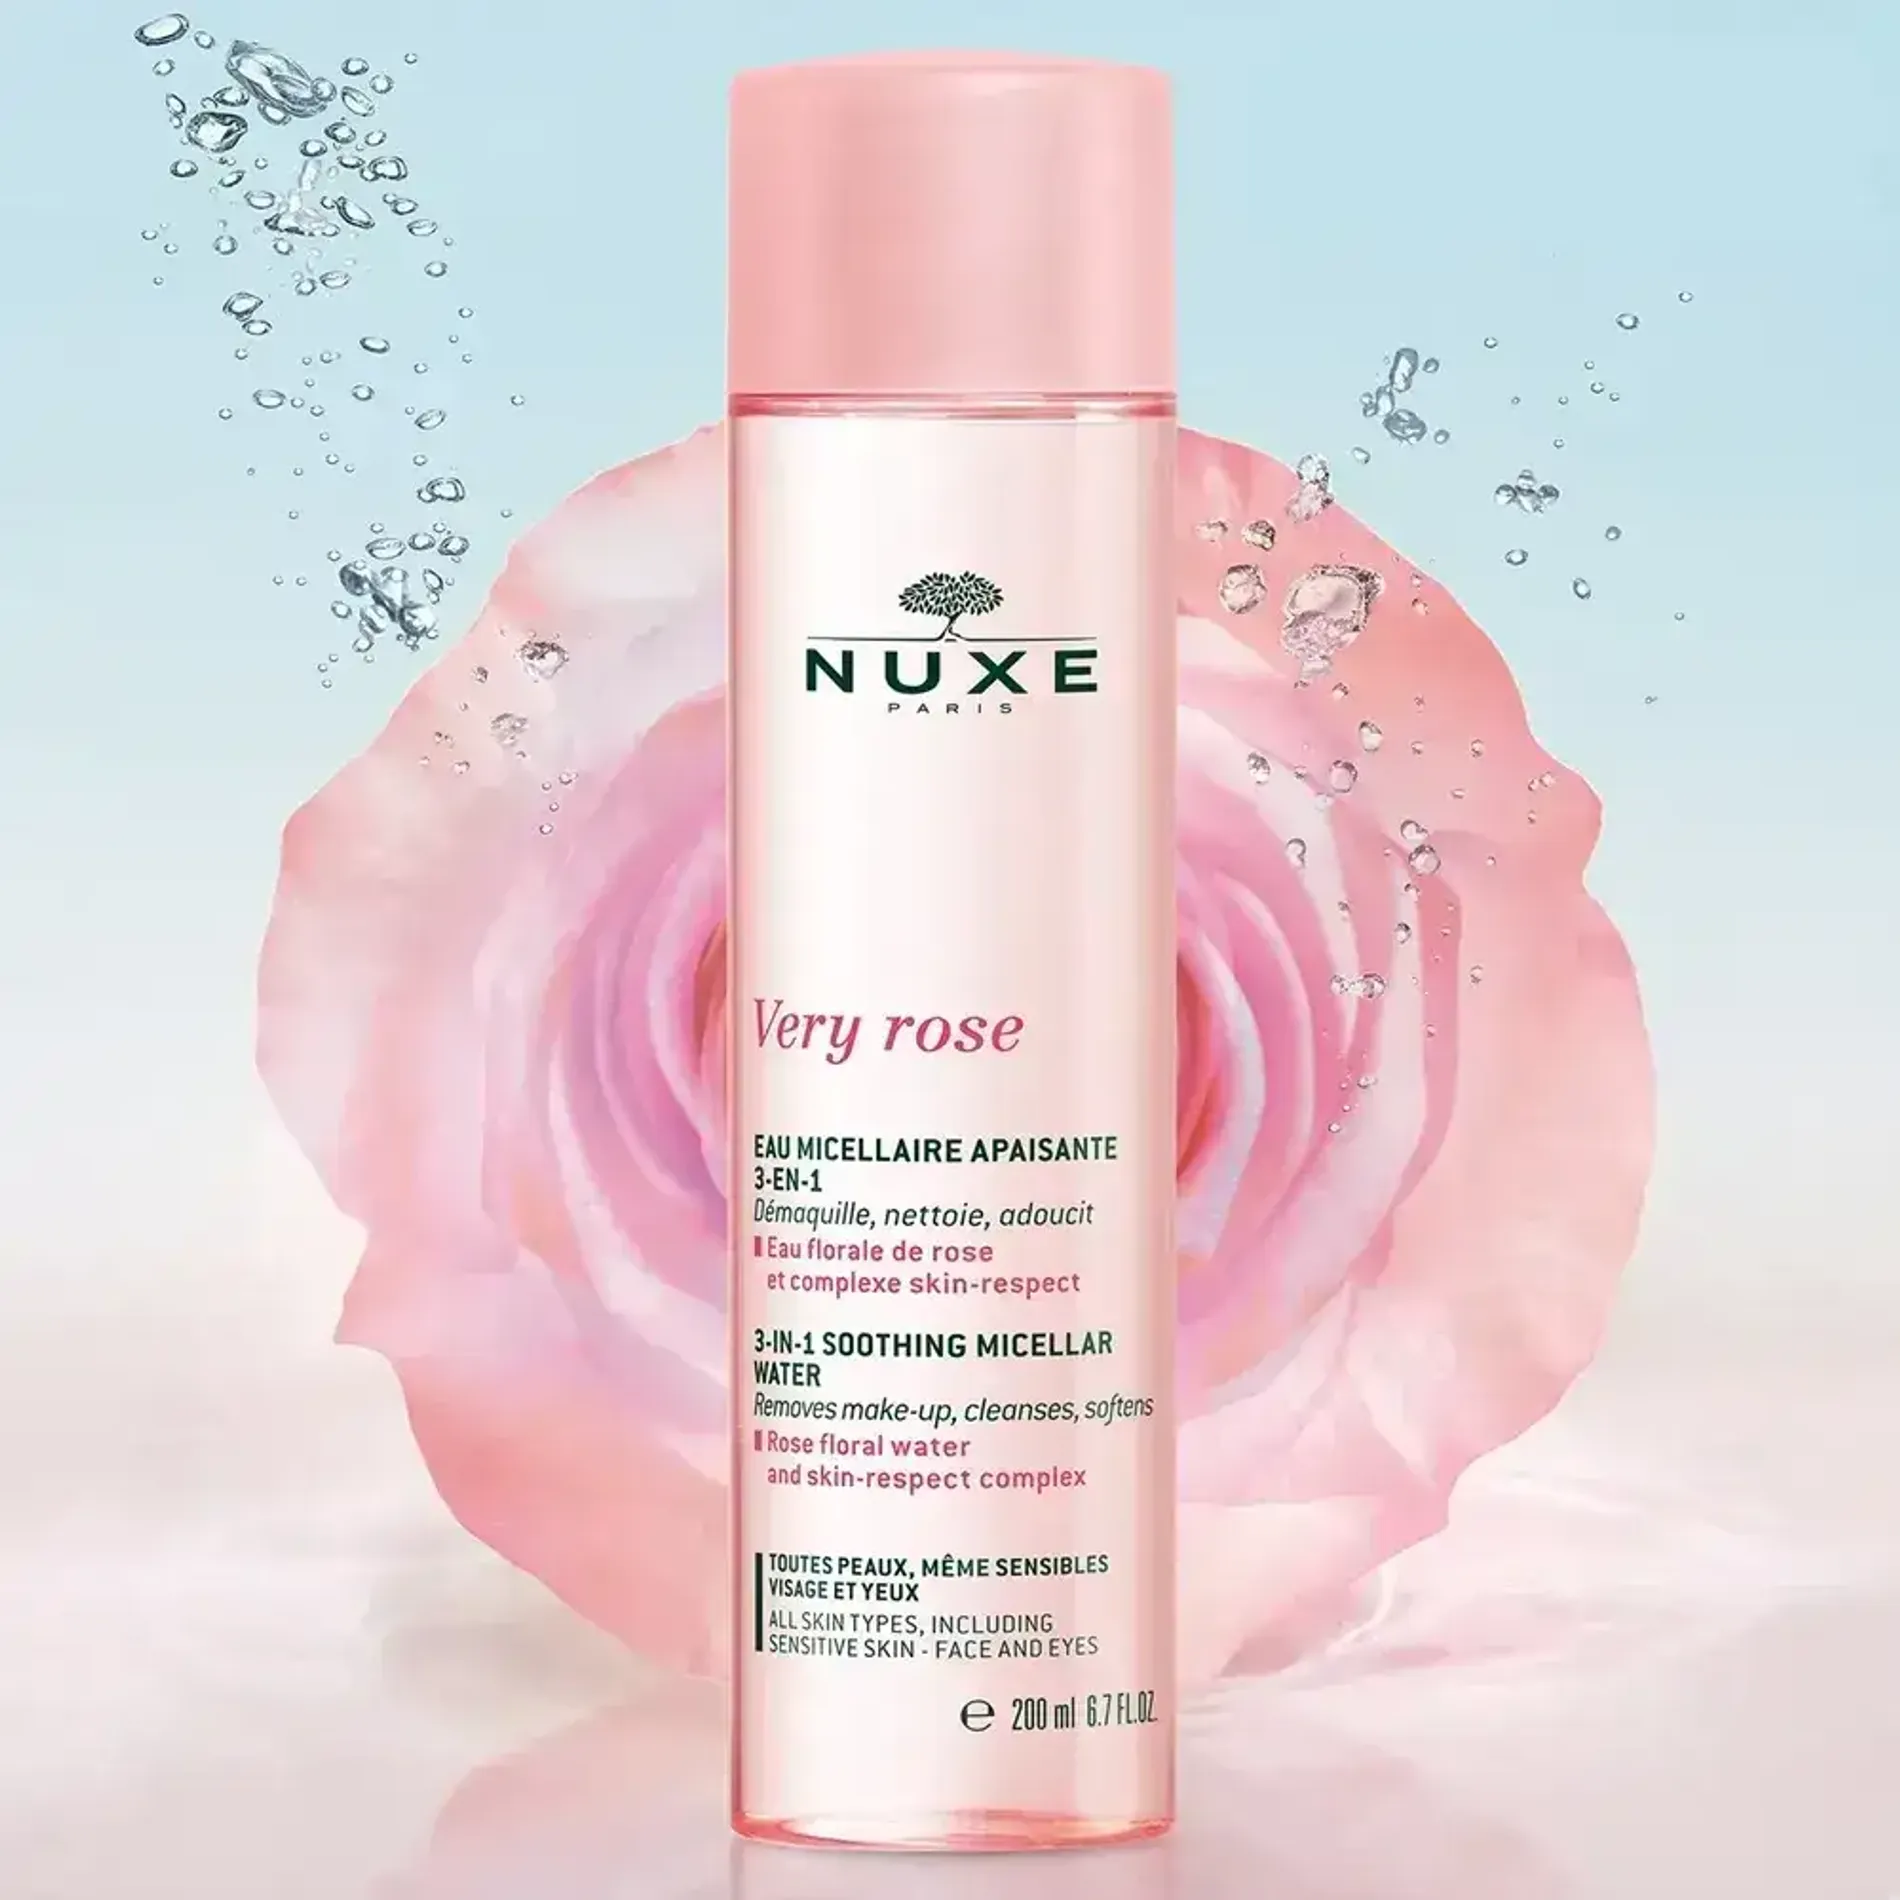 nuoc-tay-trang-3-trong-1-nuxe-very-rose-3-in-1-soothing-micellar-water-200ml-1